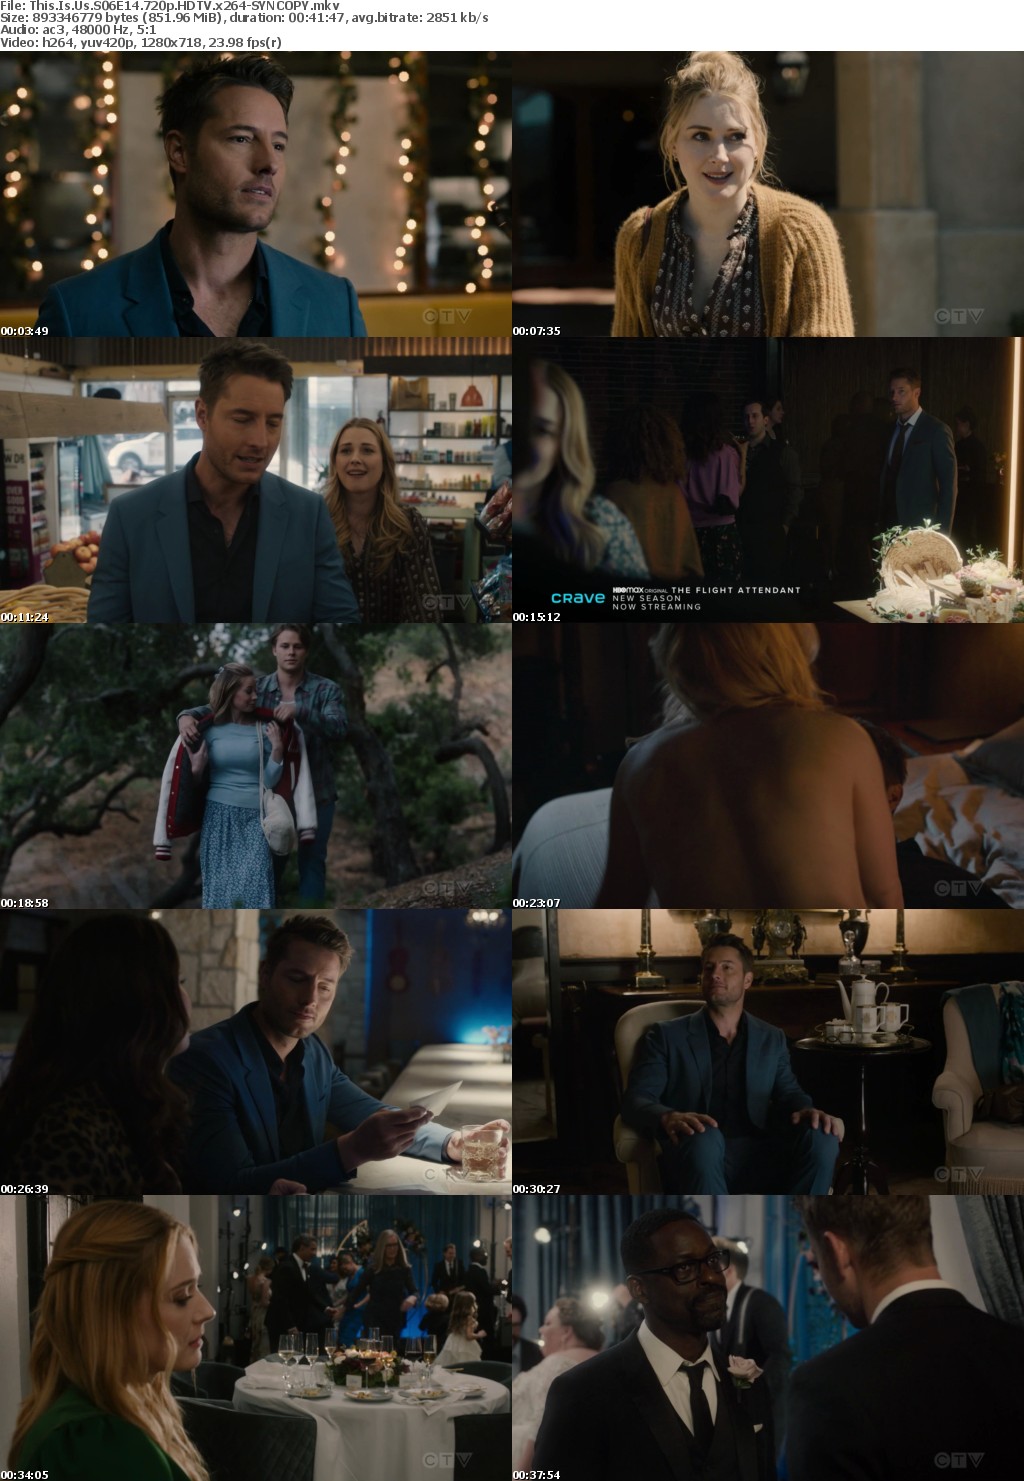 This Is Us S06E14 720p HDTV x264-SYNCOPY